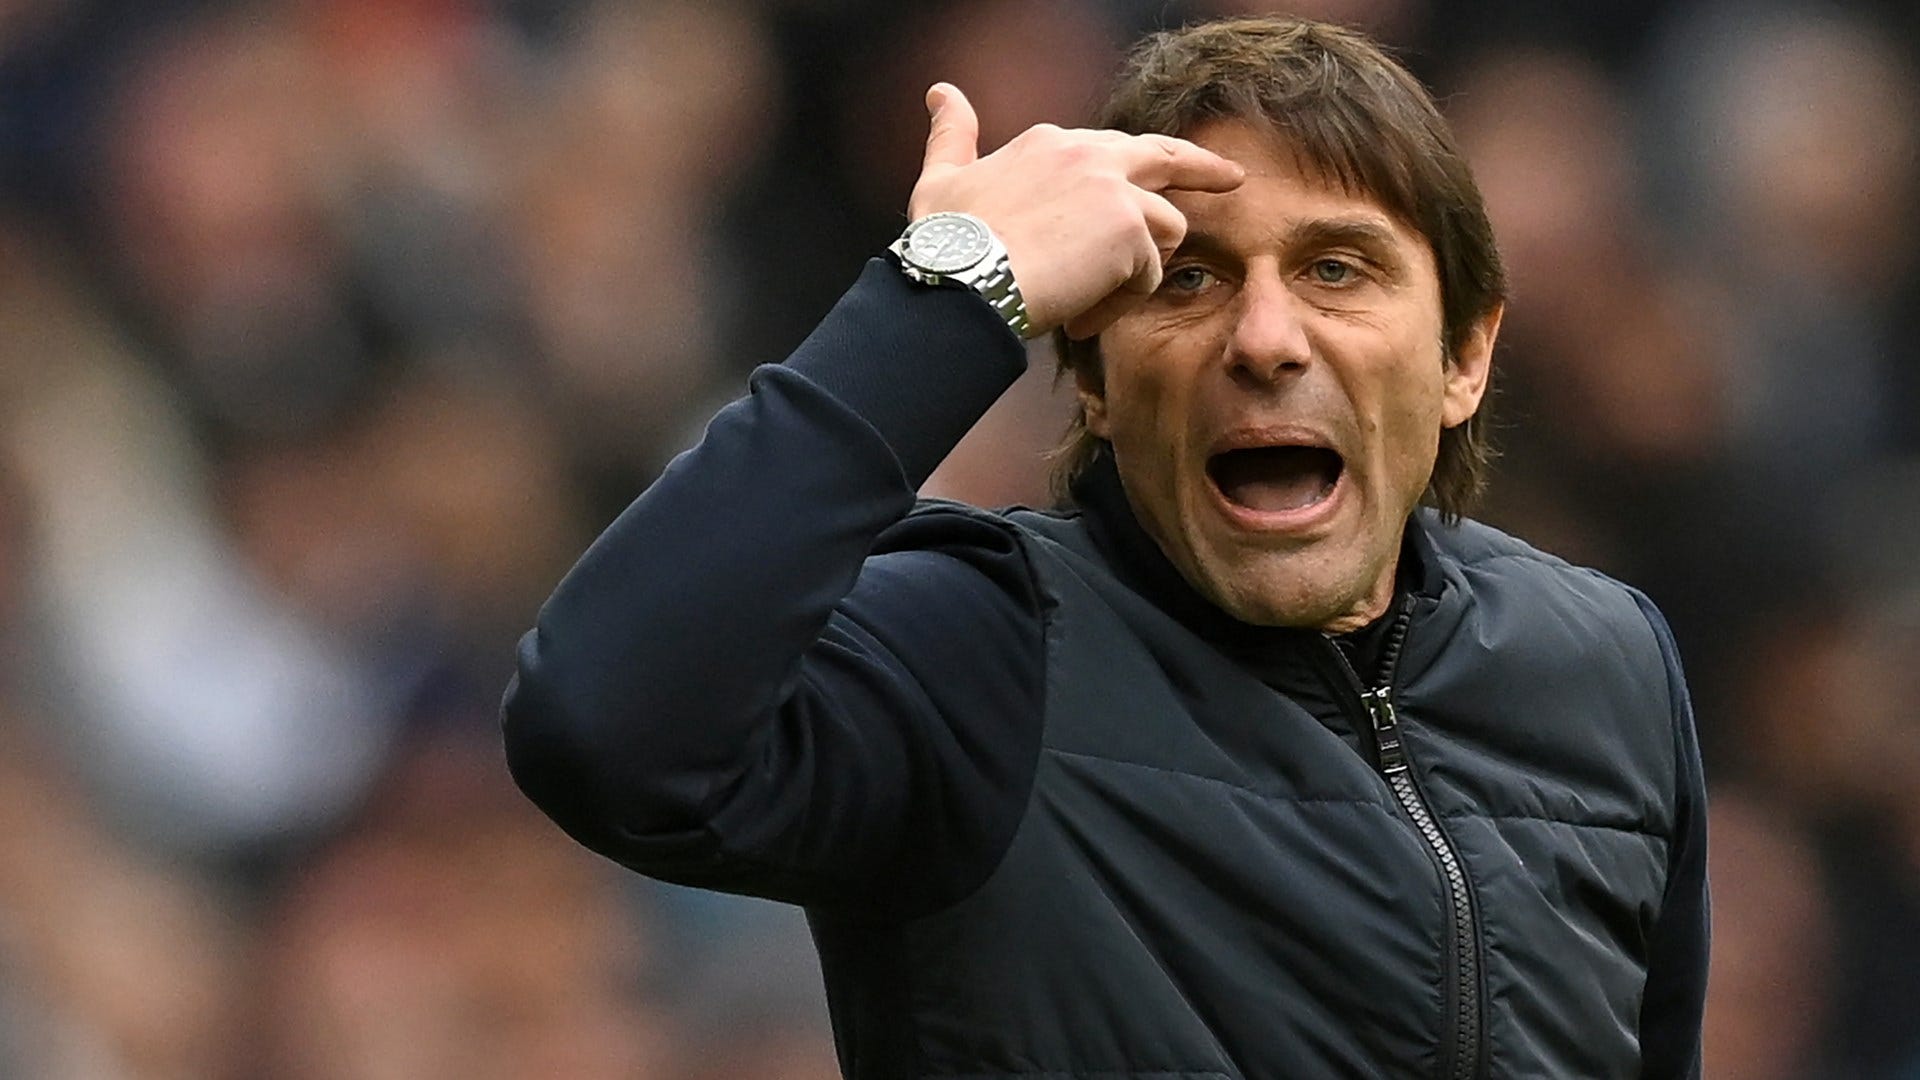 Inside Antonio Conte's Tottenham sacking: Transfer complaints, off-field tragedy and family ties in Italy led to Southampton EXPLOSION